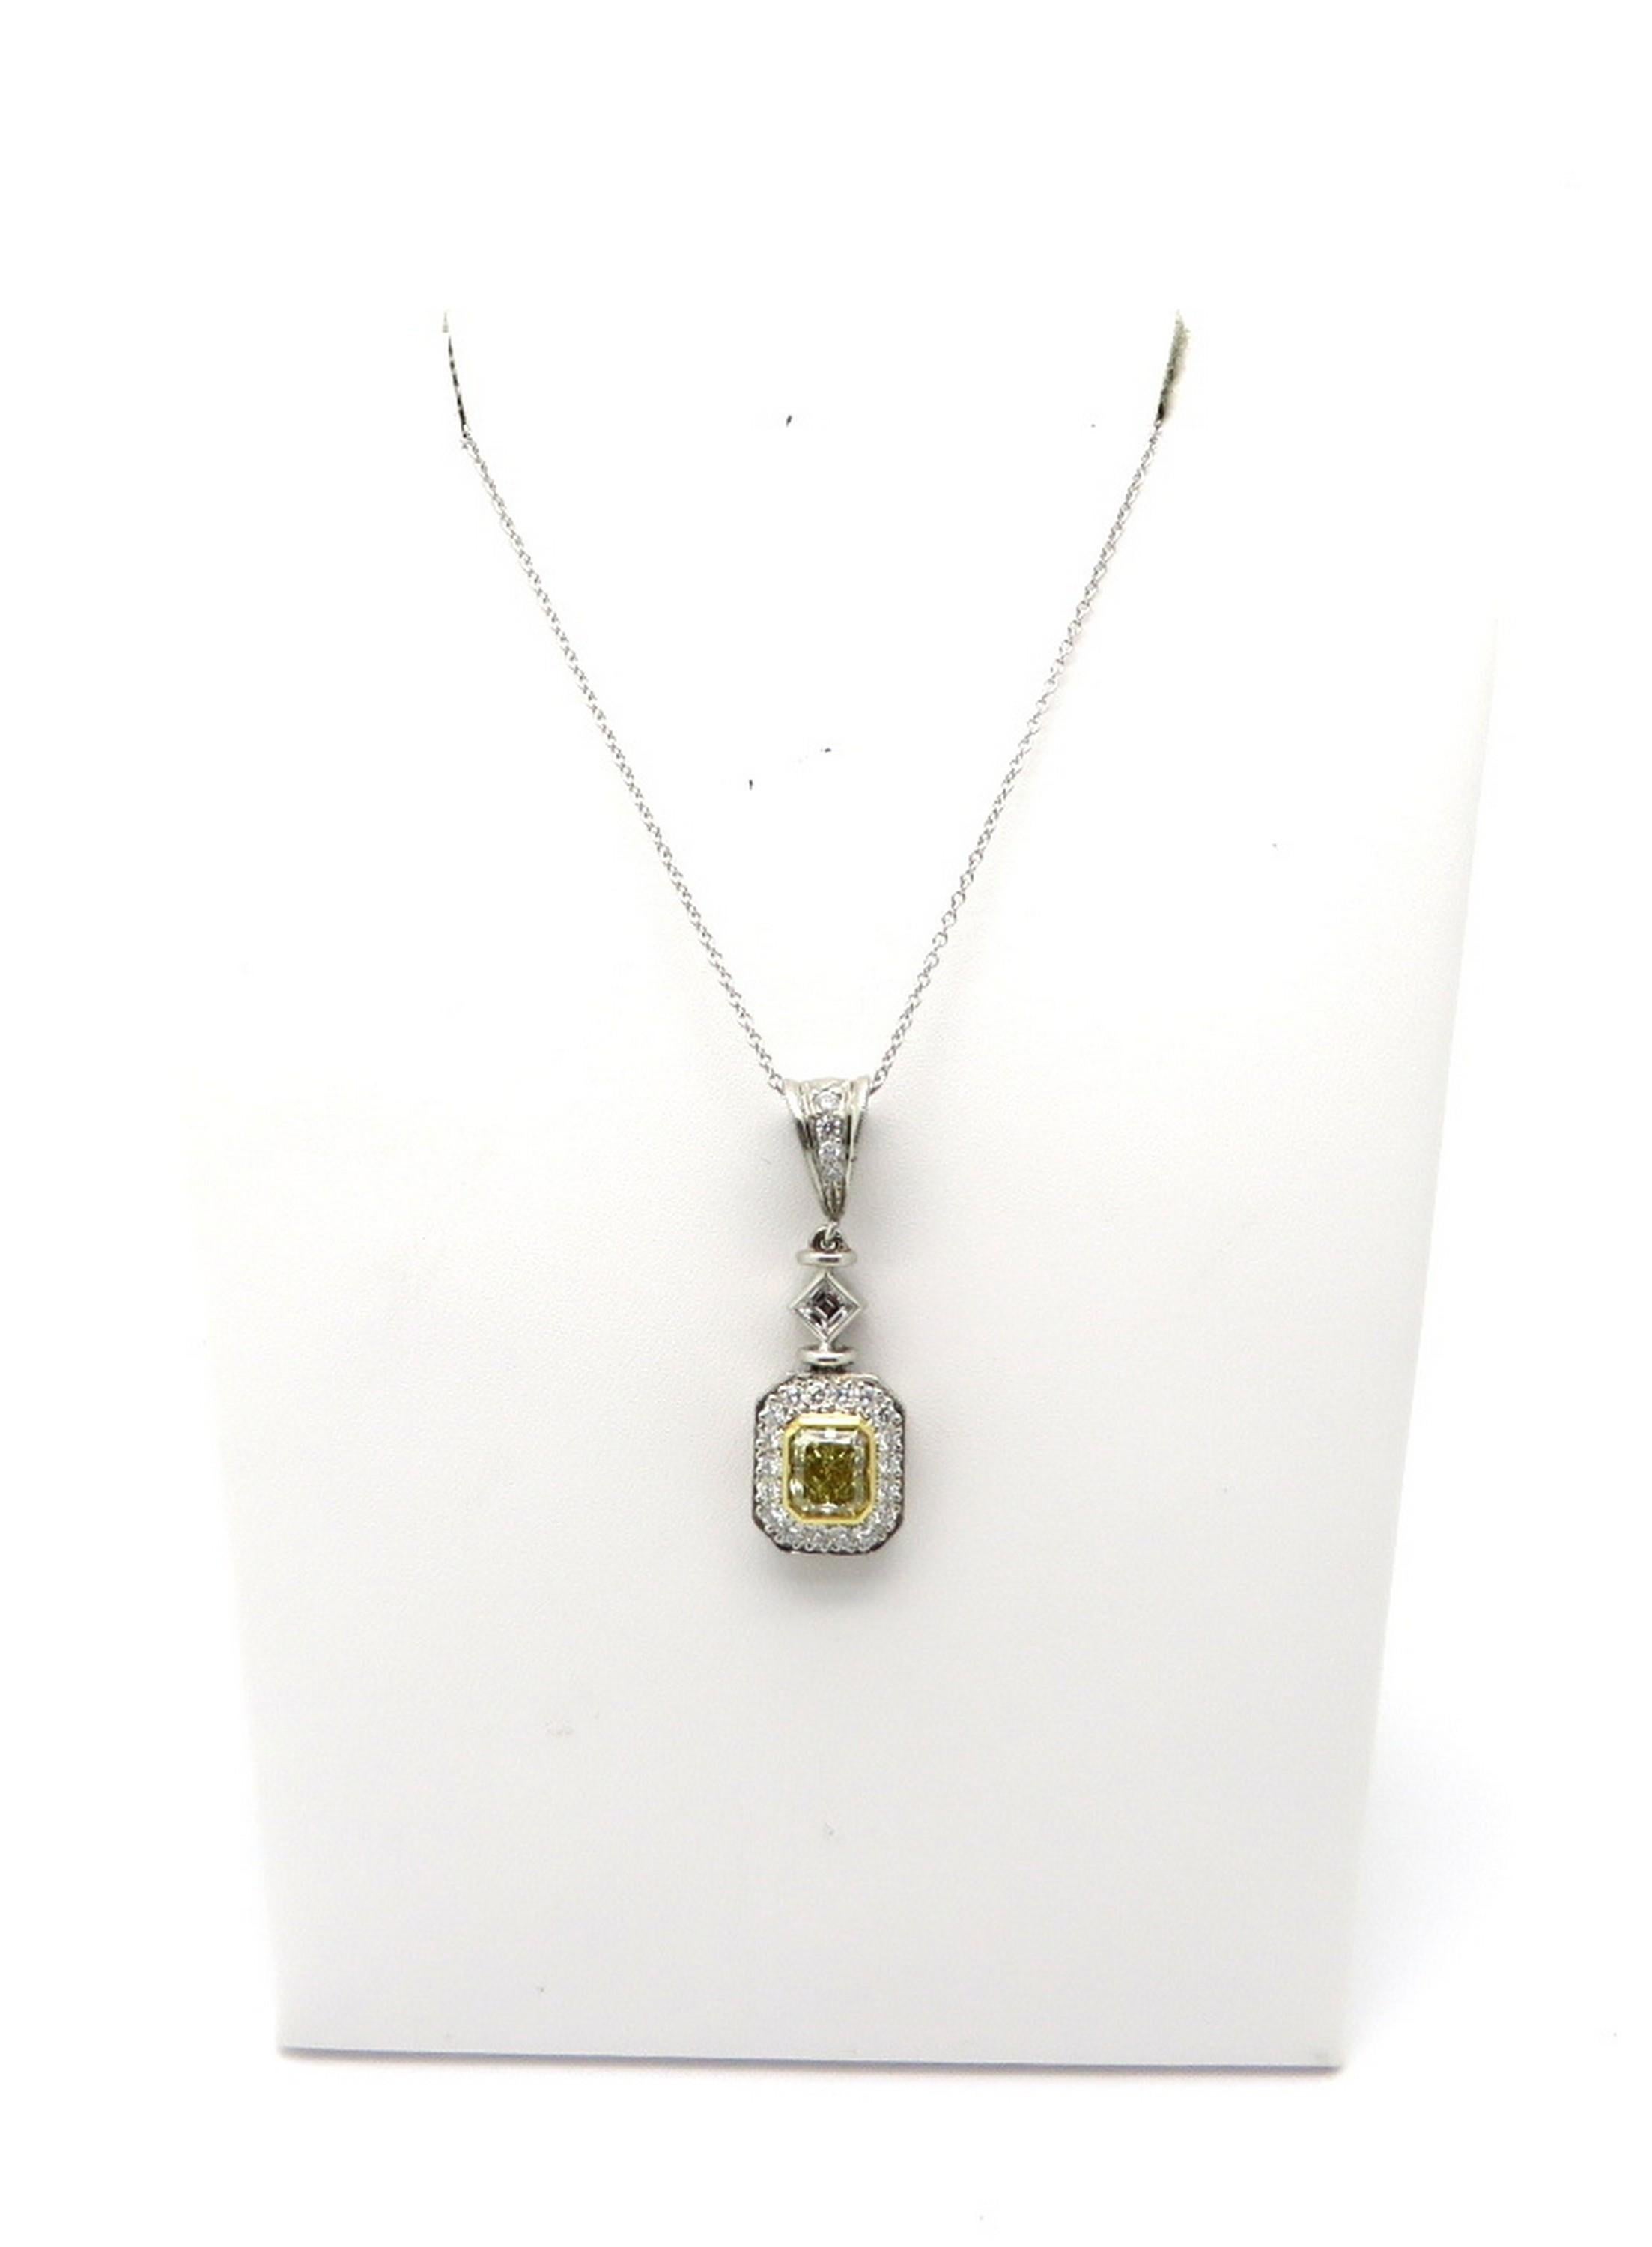 Estate 1.00 carat fancy yellow radiant cut diamond 18K and platinum designer Michael Beaudry necklace. Centering one fancy yellow radiant cut diamond, bezel set in 18K yellow gold, weighing approximately 1.00 carat. Clarity grade: VS1. Accented with